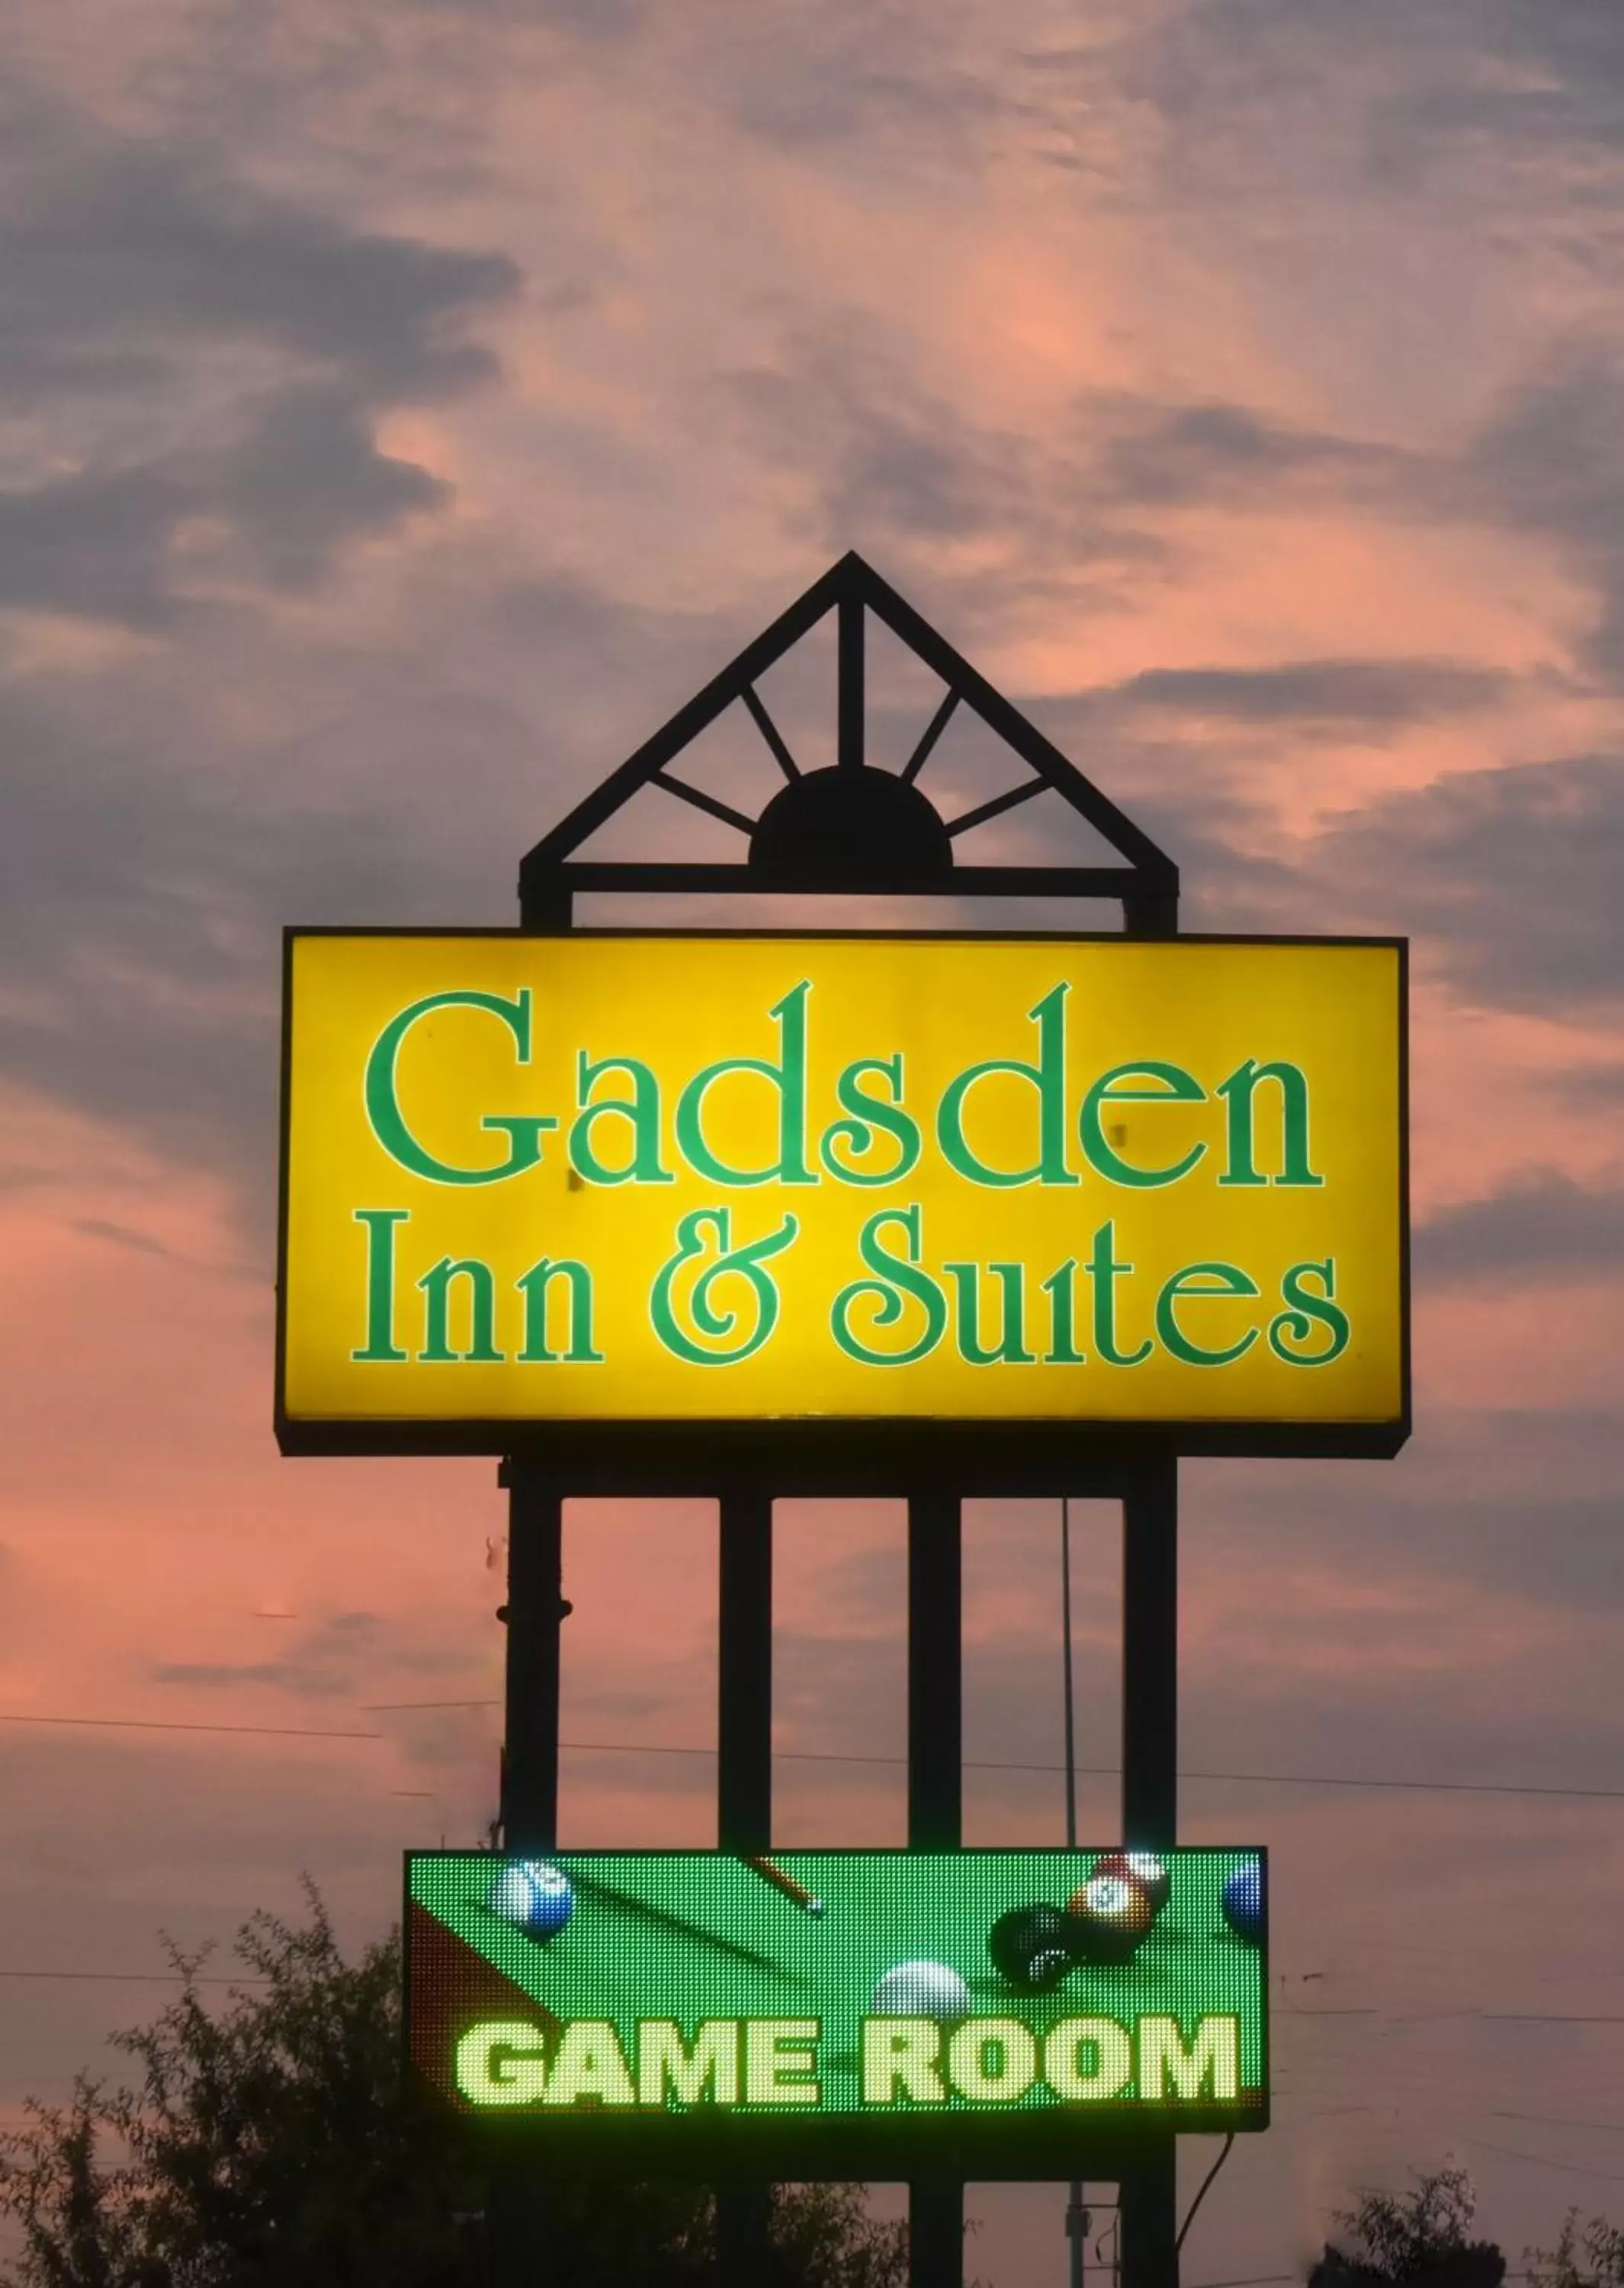 Property logo or sign in Gadsden Inn and Suites